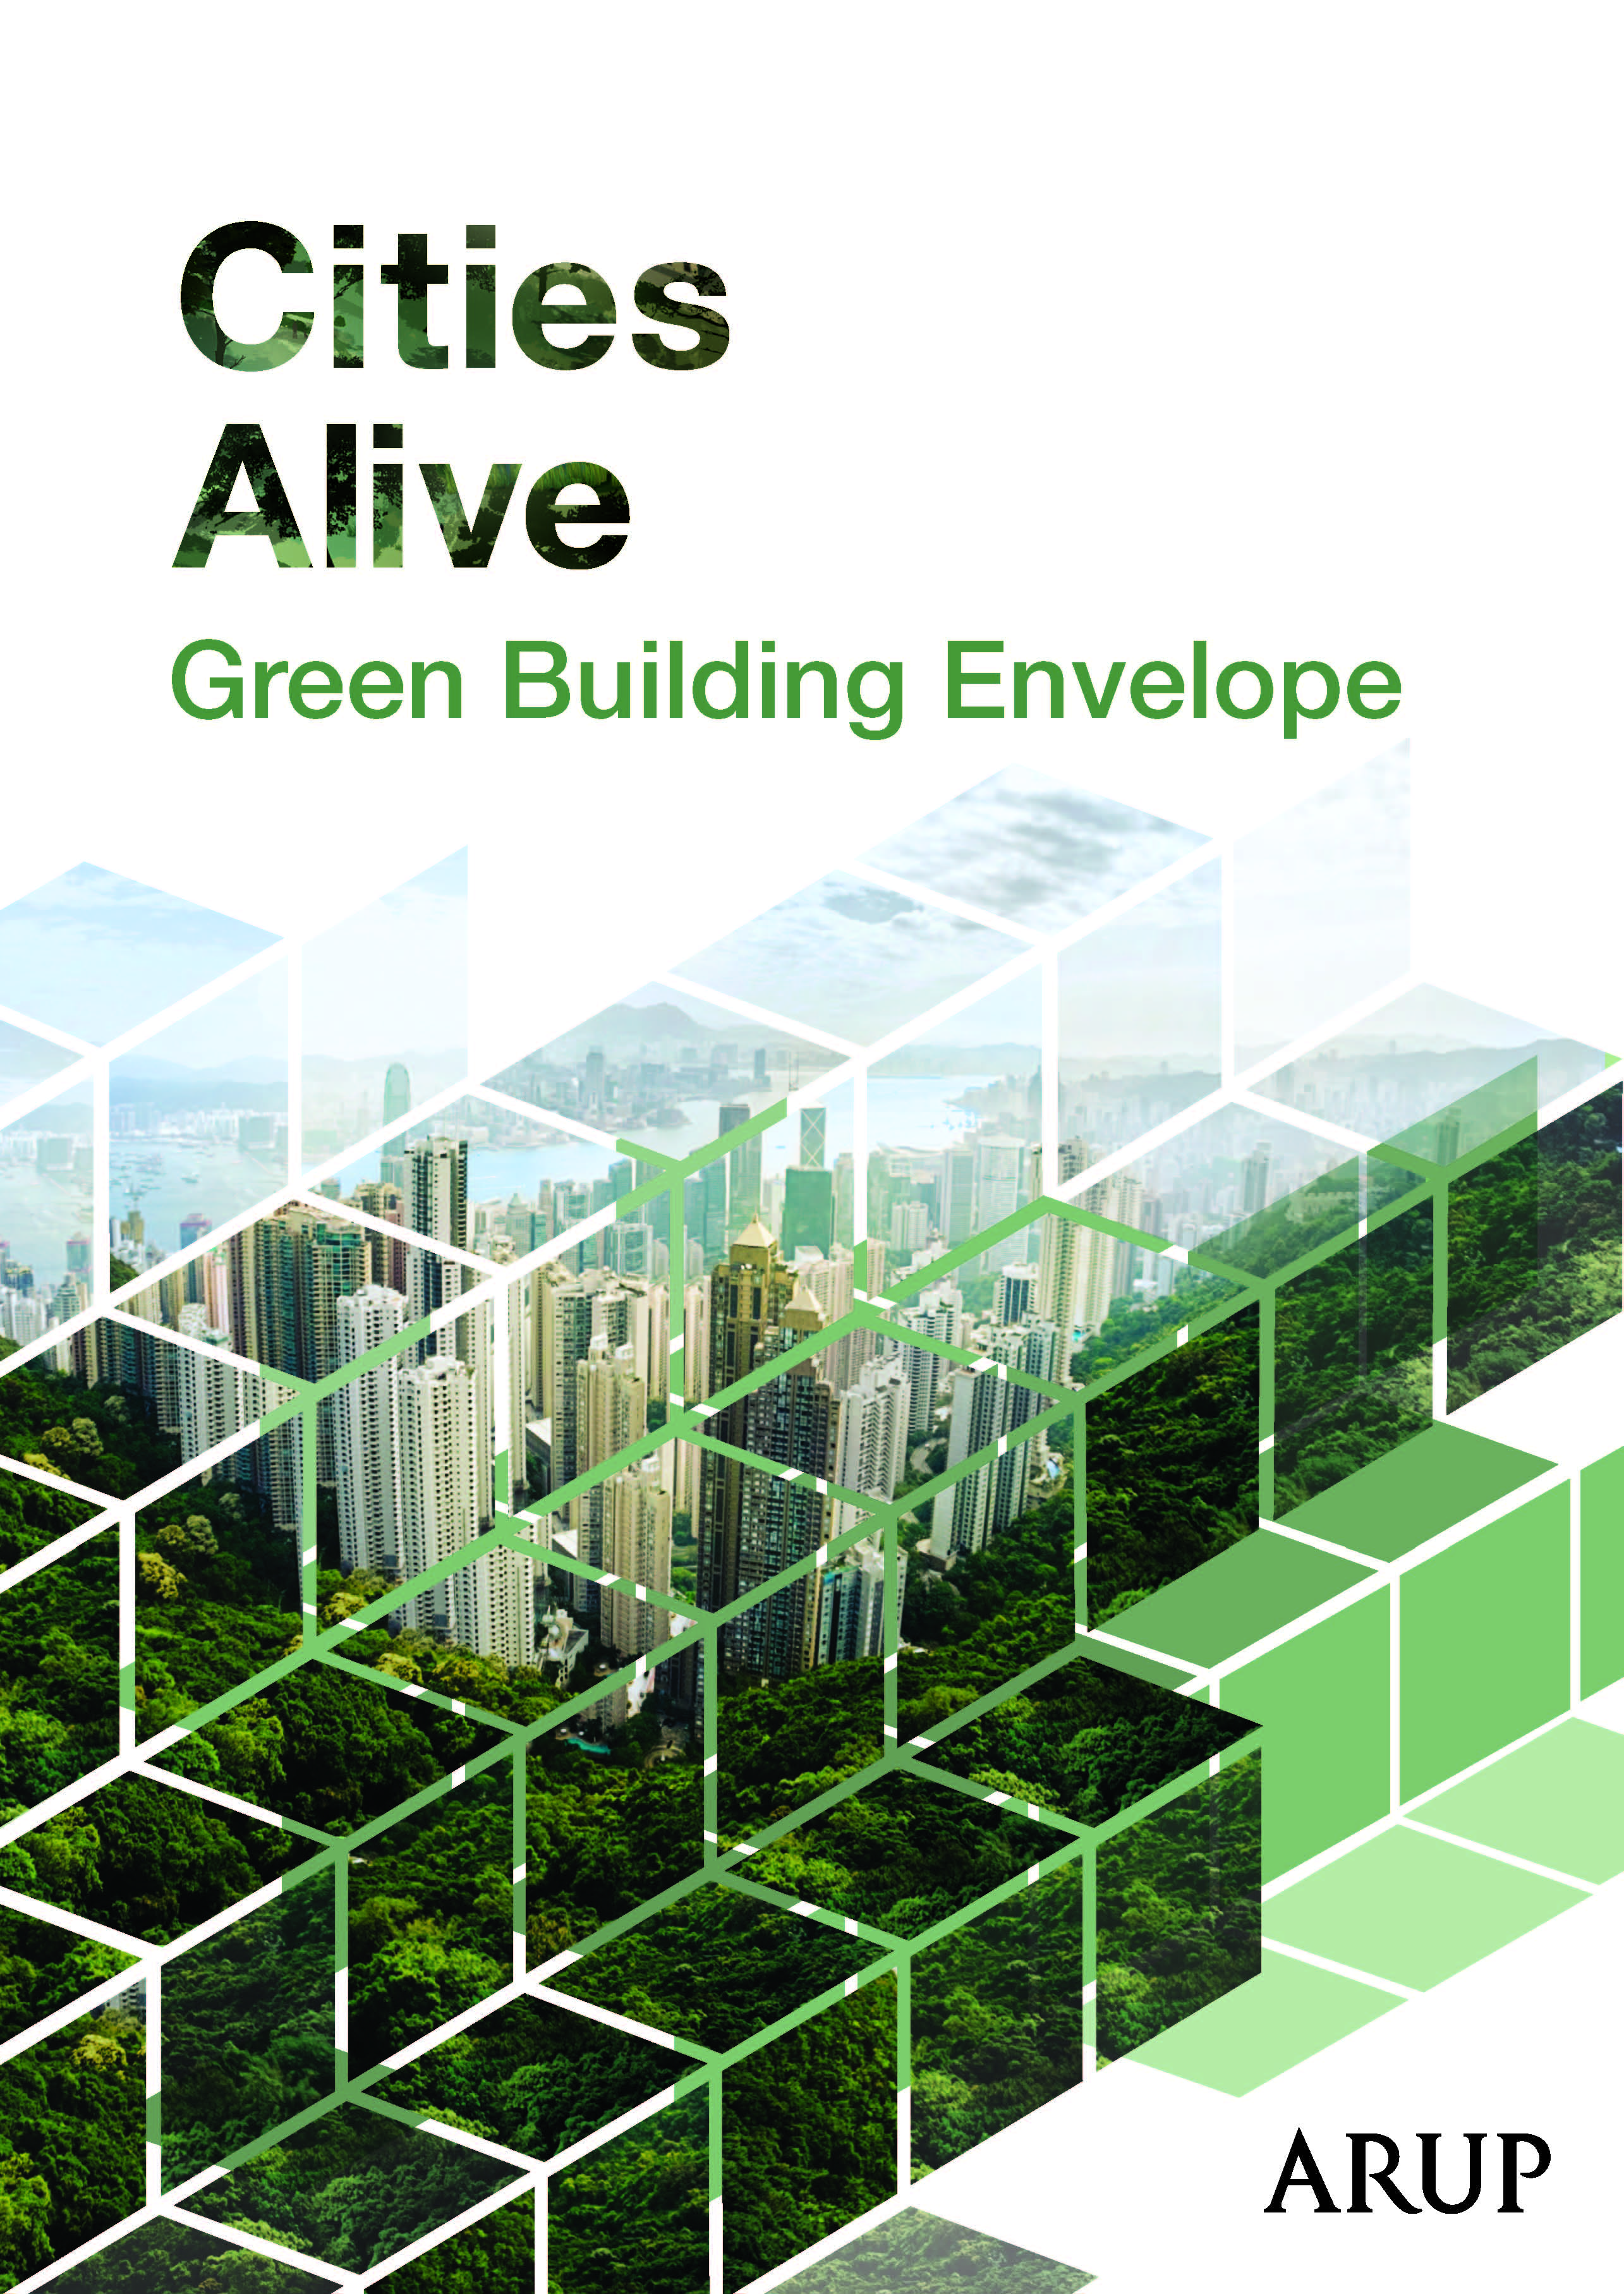 arup_green-building-envelope_2016_cover